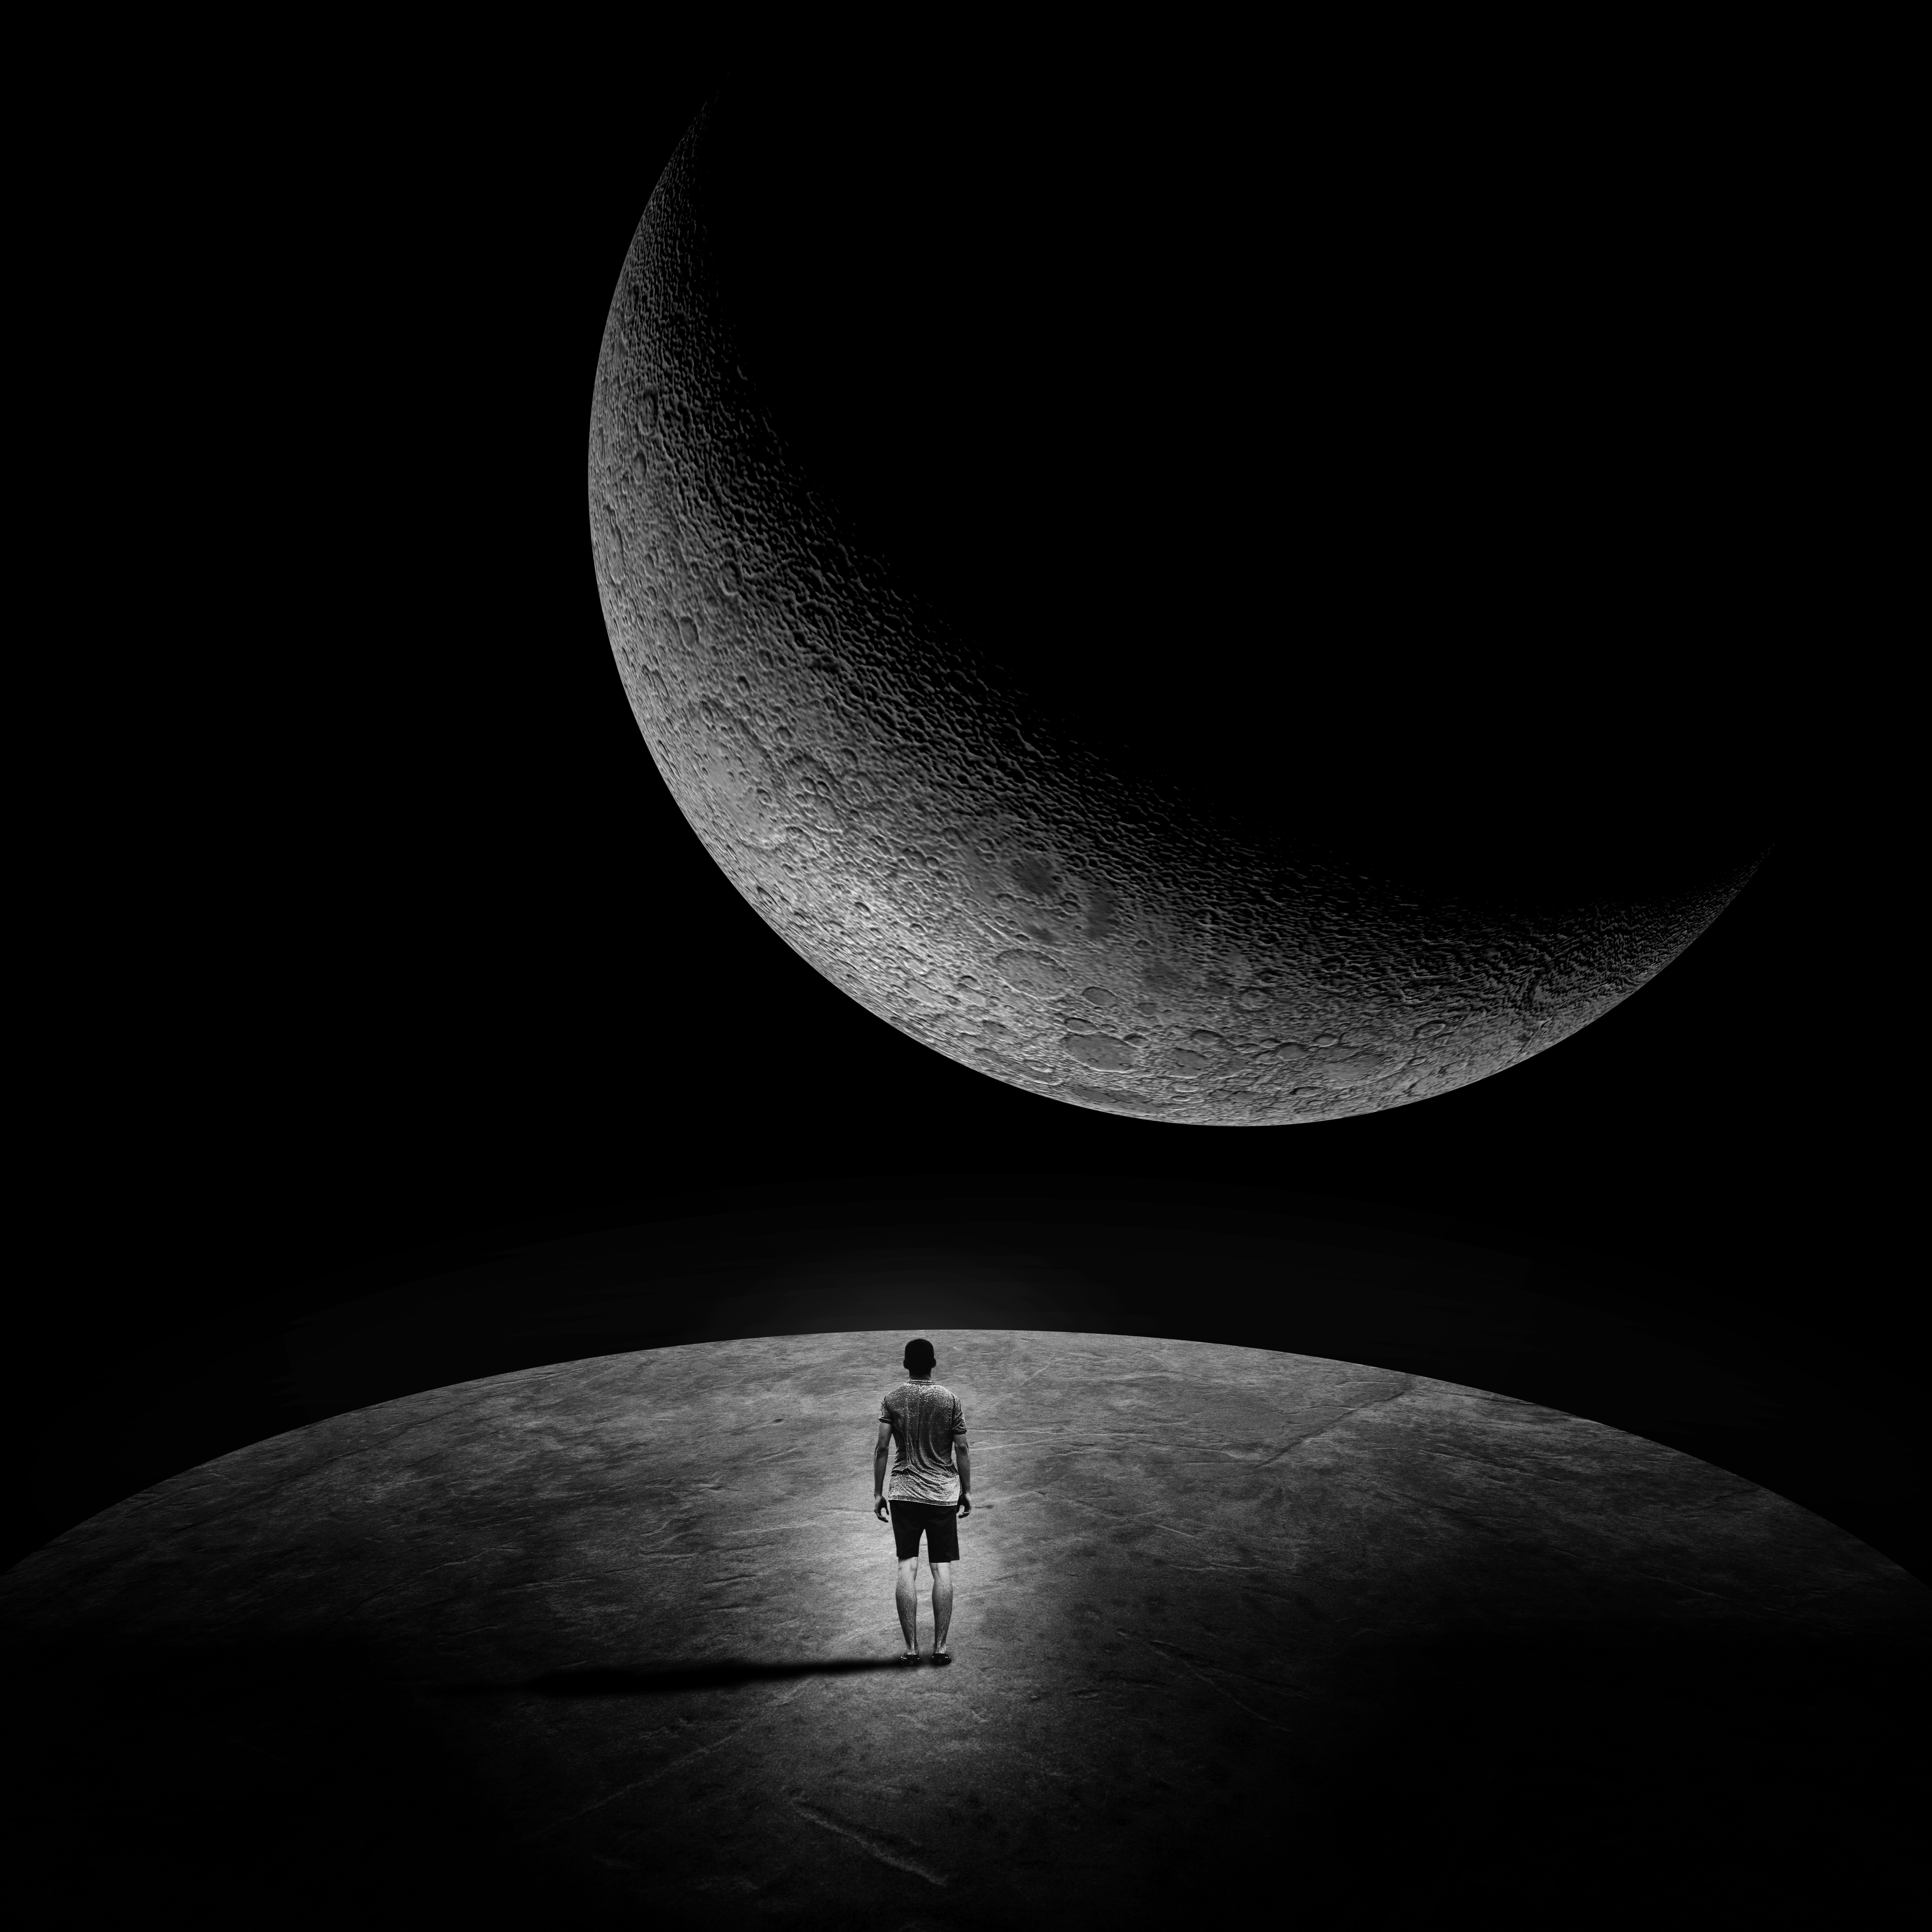 loneliness, human, space, black and white, moon, cosmic, black, dark, extraterrestrial, person